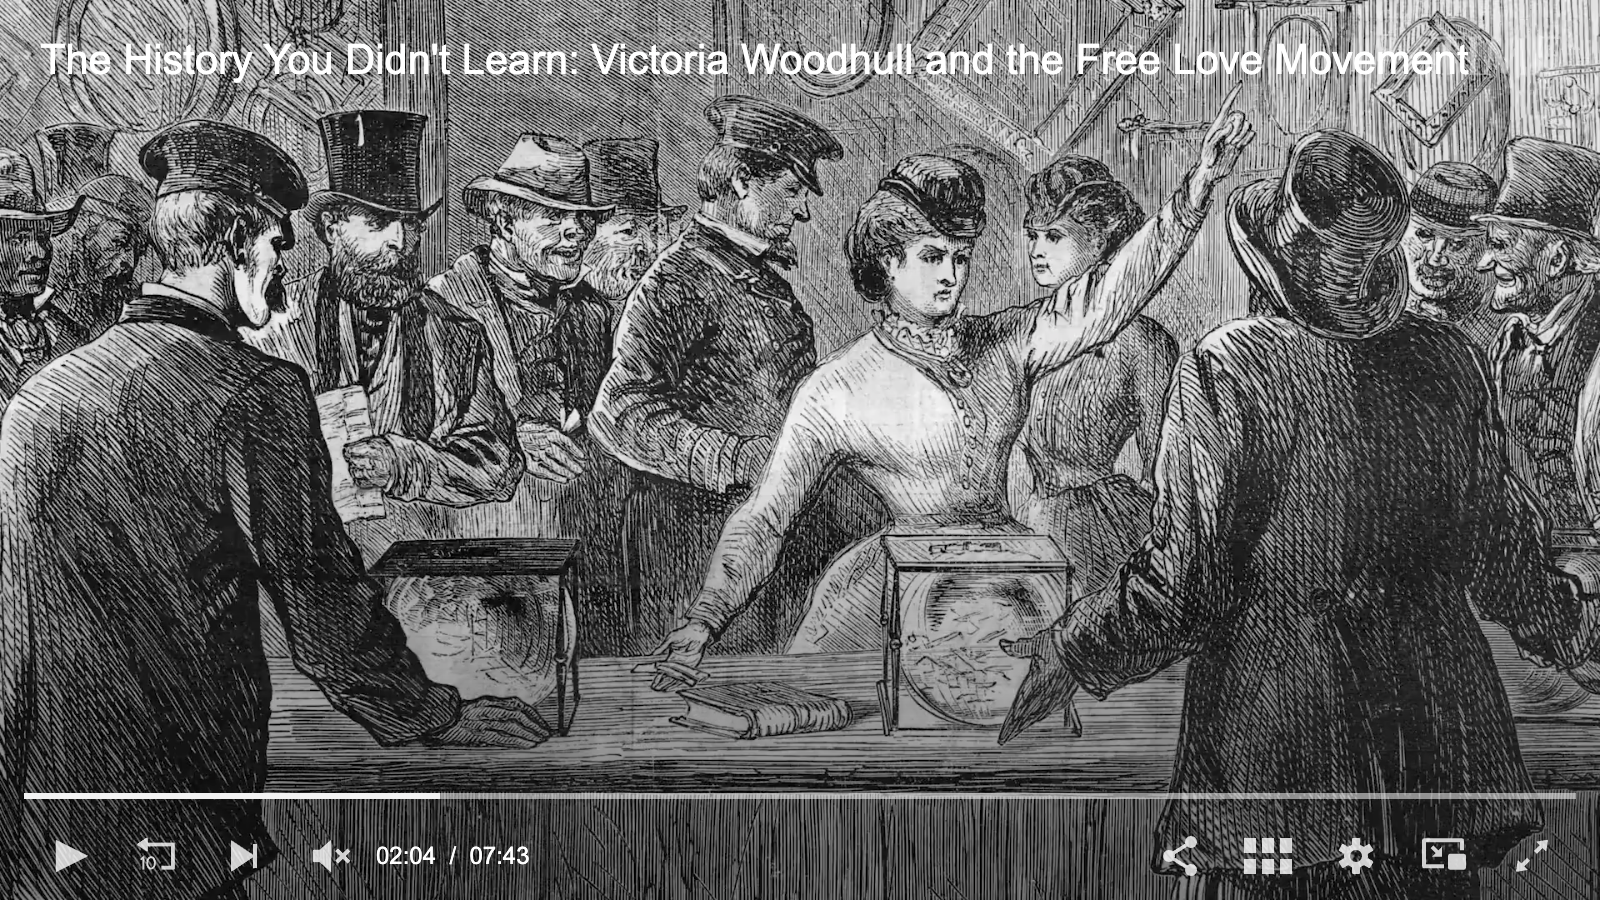 Video still from Victoria Woodhull and the Free Love Movement